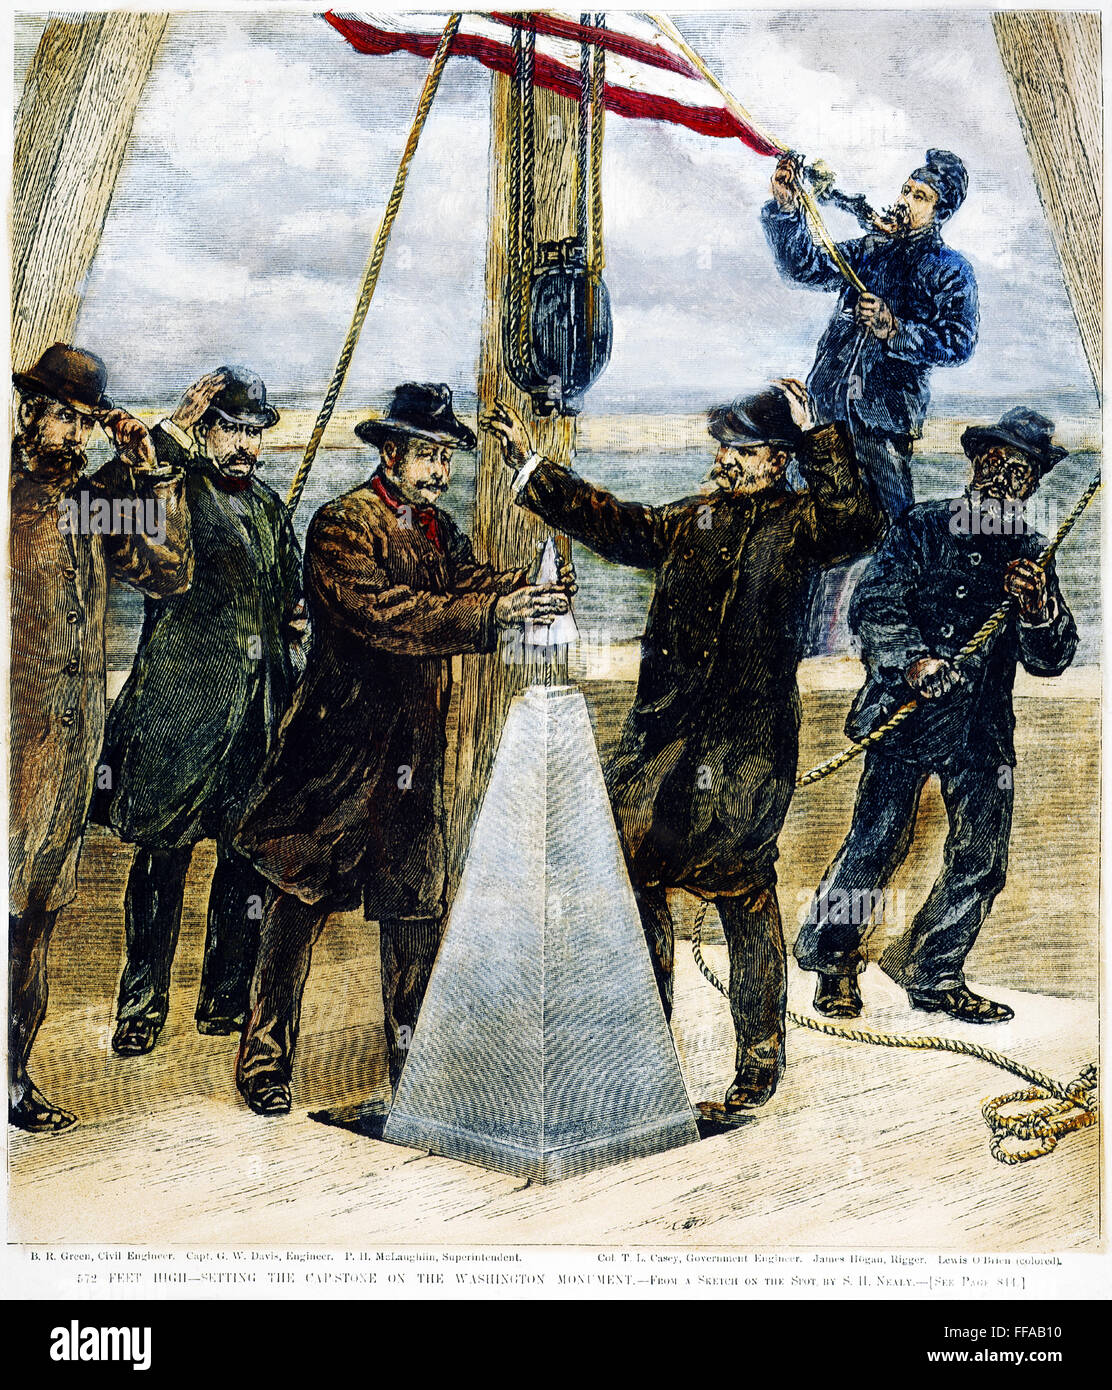 WASHINGTON MONUMENT, 1884. /nThe completion of the Washington Monument in Washington, D.C., 6 December 1884. Line engraving from a contemporary American newspaper. Stock Photo